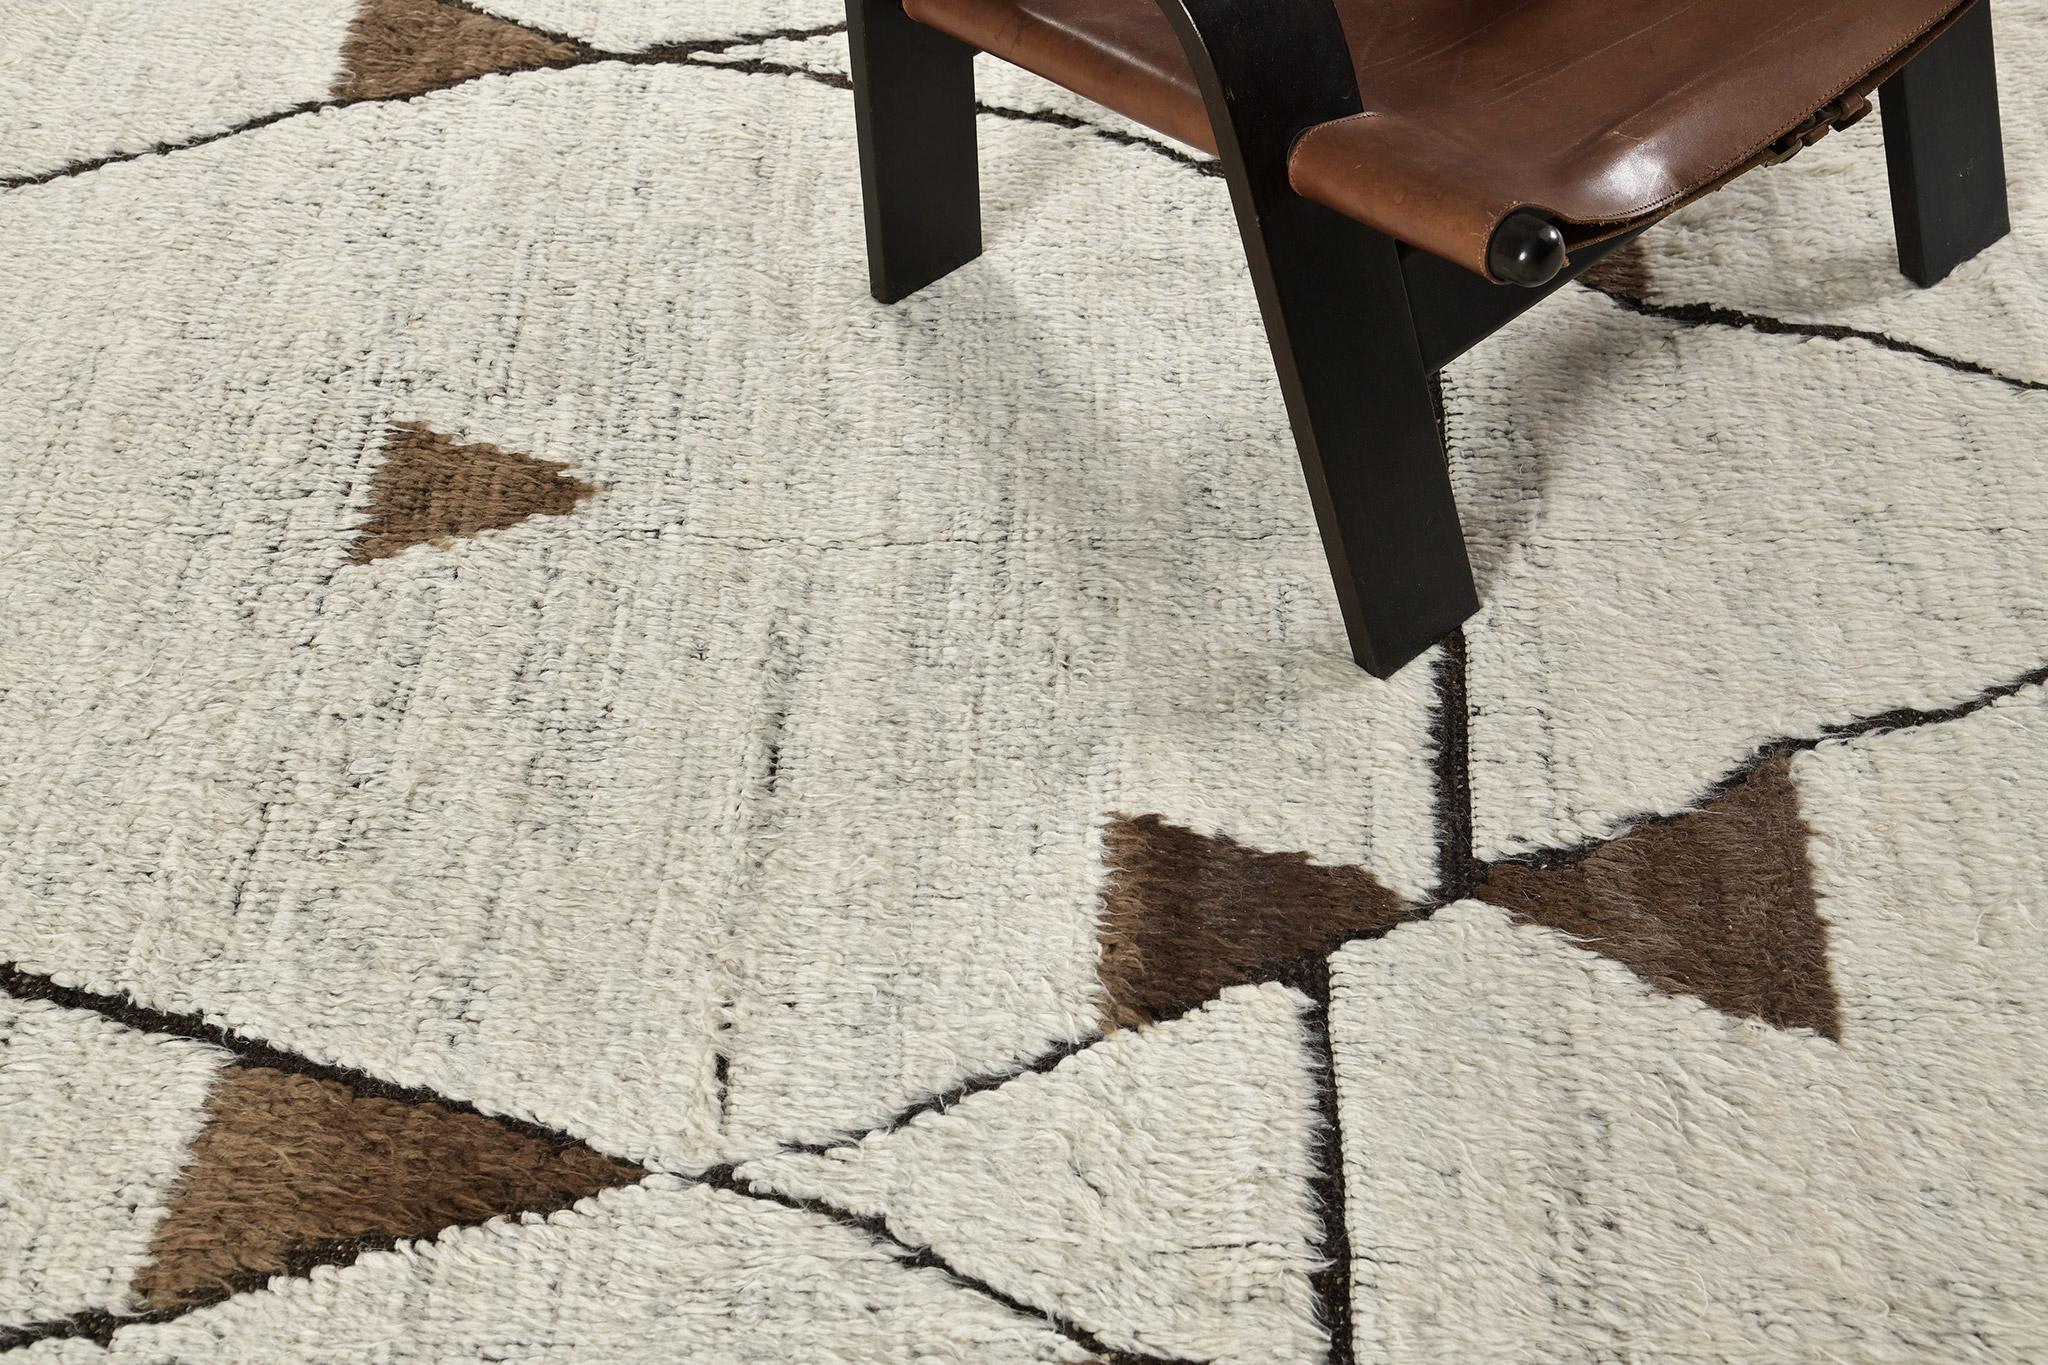 An alluring earth-toned Darbu rug from the Atlas Tribe of Morocco. This remarkable handwoven pile will add character to any room with its symbolic and geometric patterning. Modern contemporary interiors are the best fit for this masterpiece.

Rug